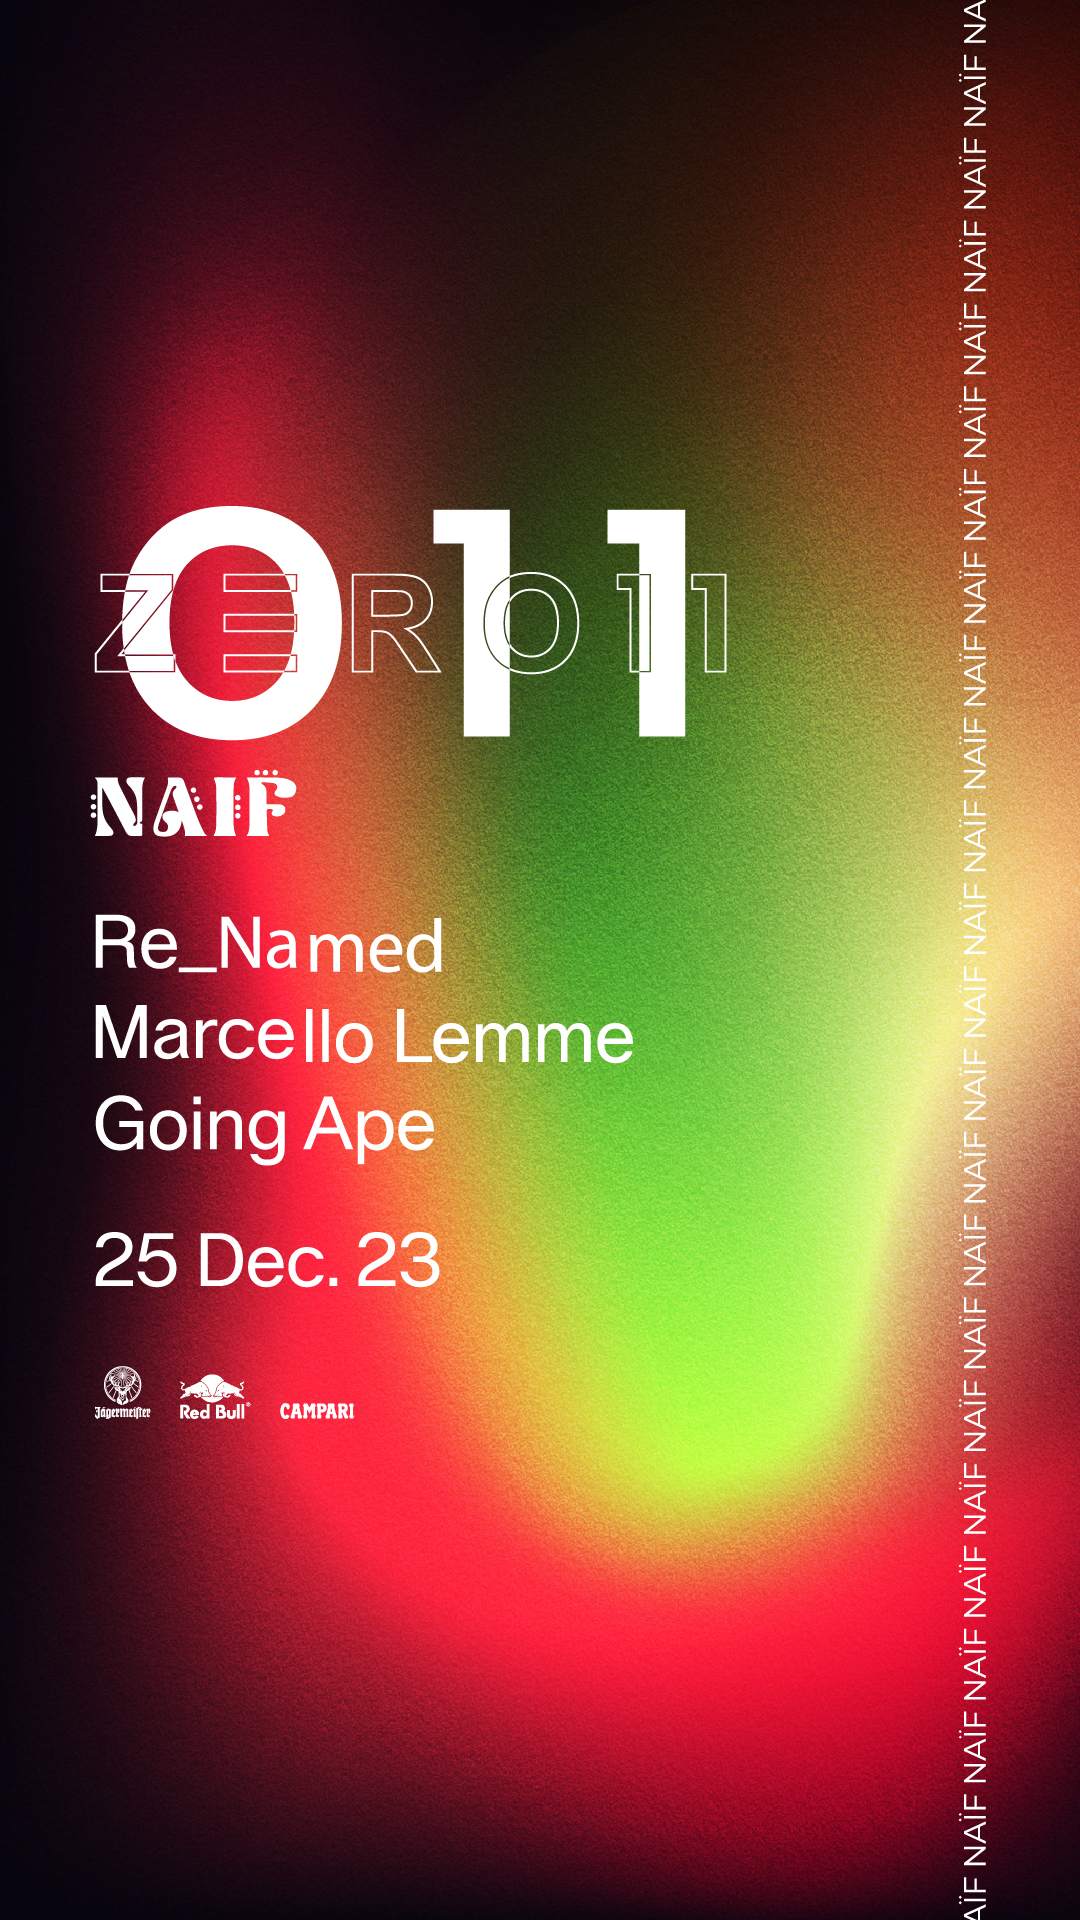 Club Zero11 pres. NAIF with Re_Named, Marcello Lemme, Going Ape - フライヤー裏